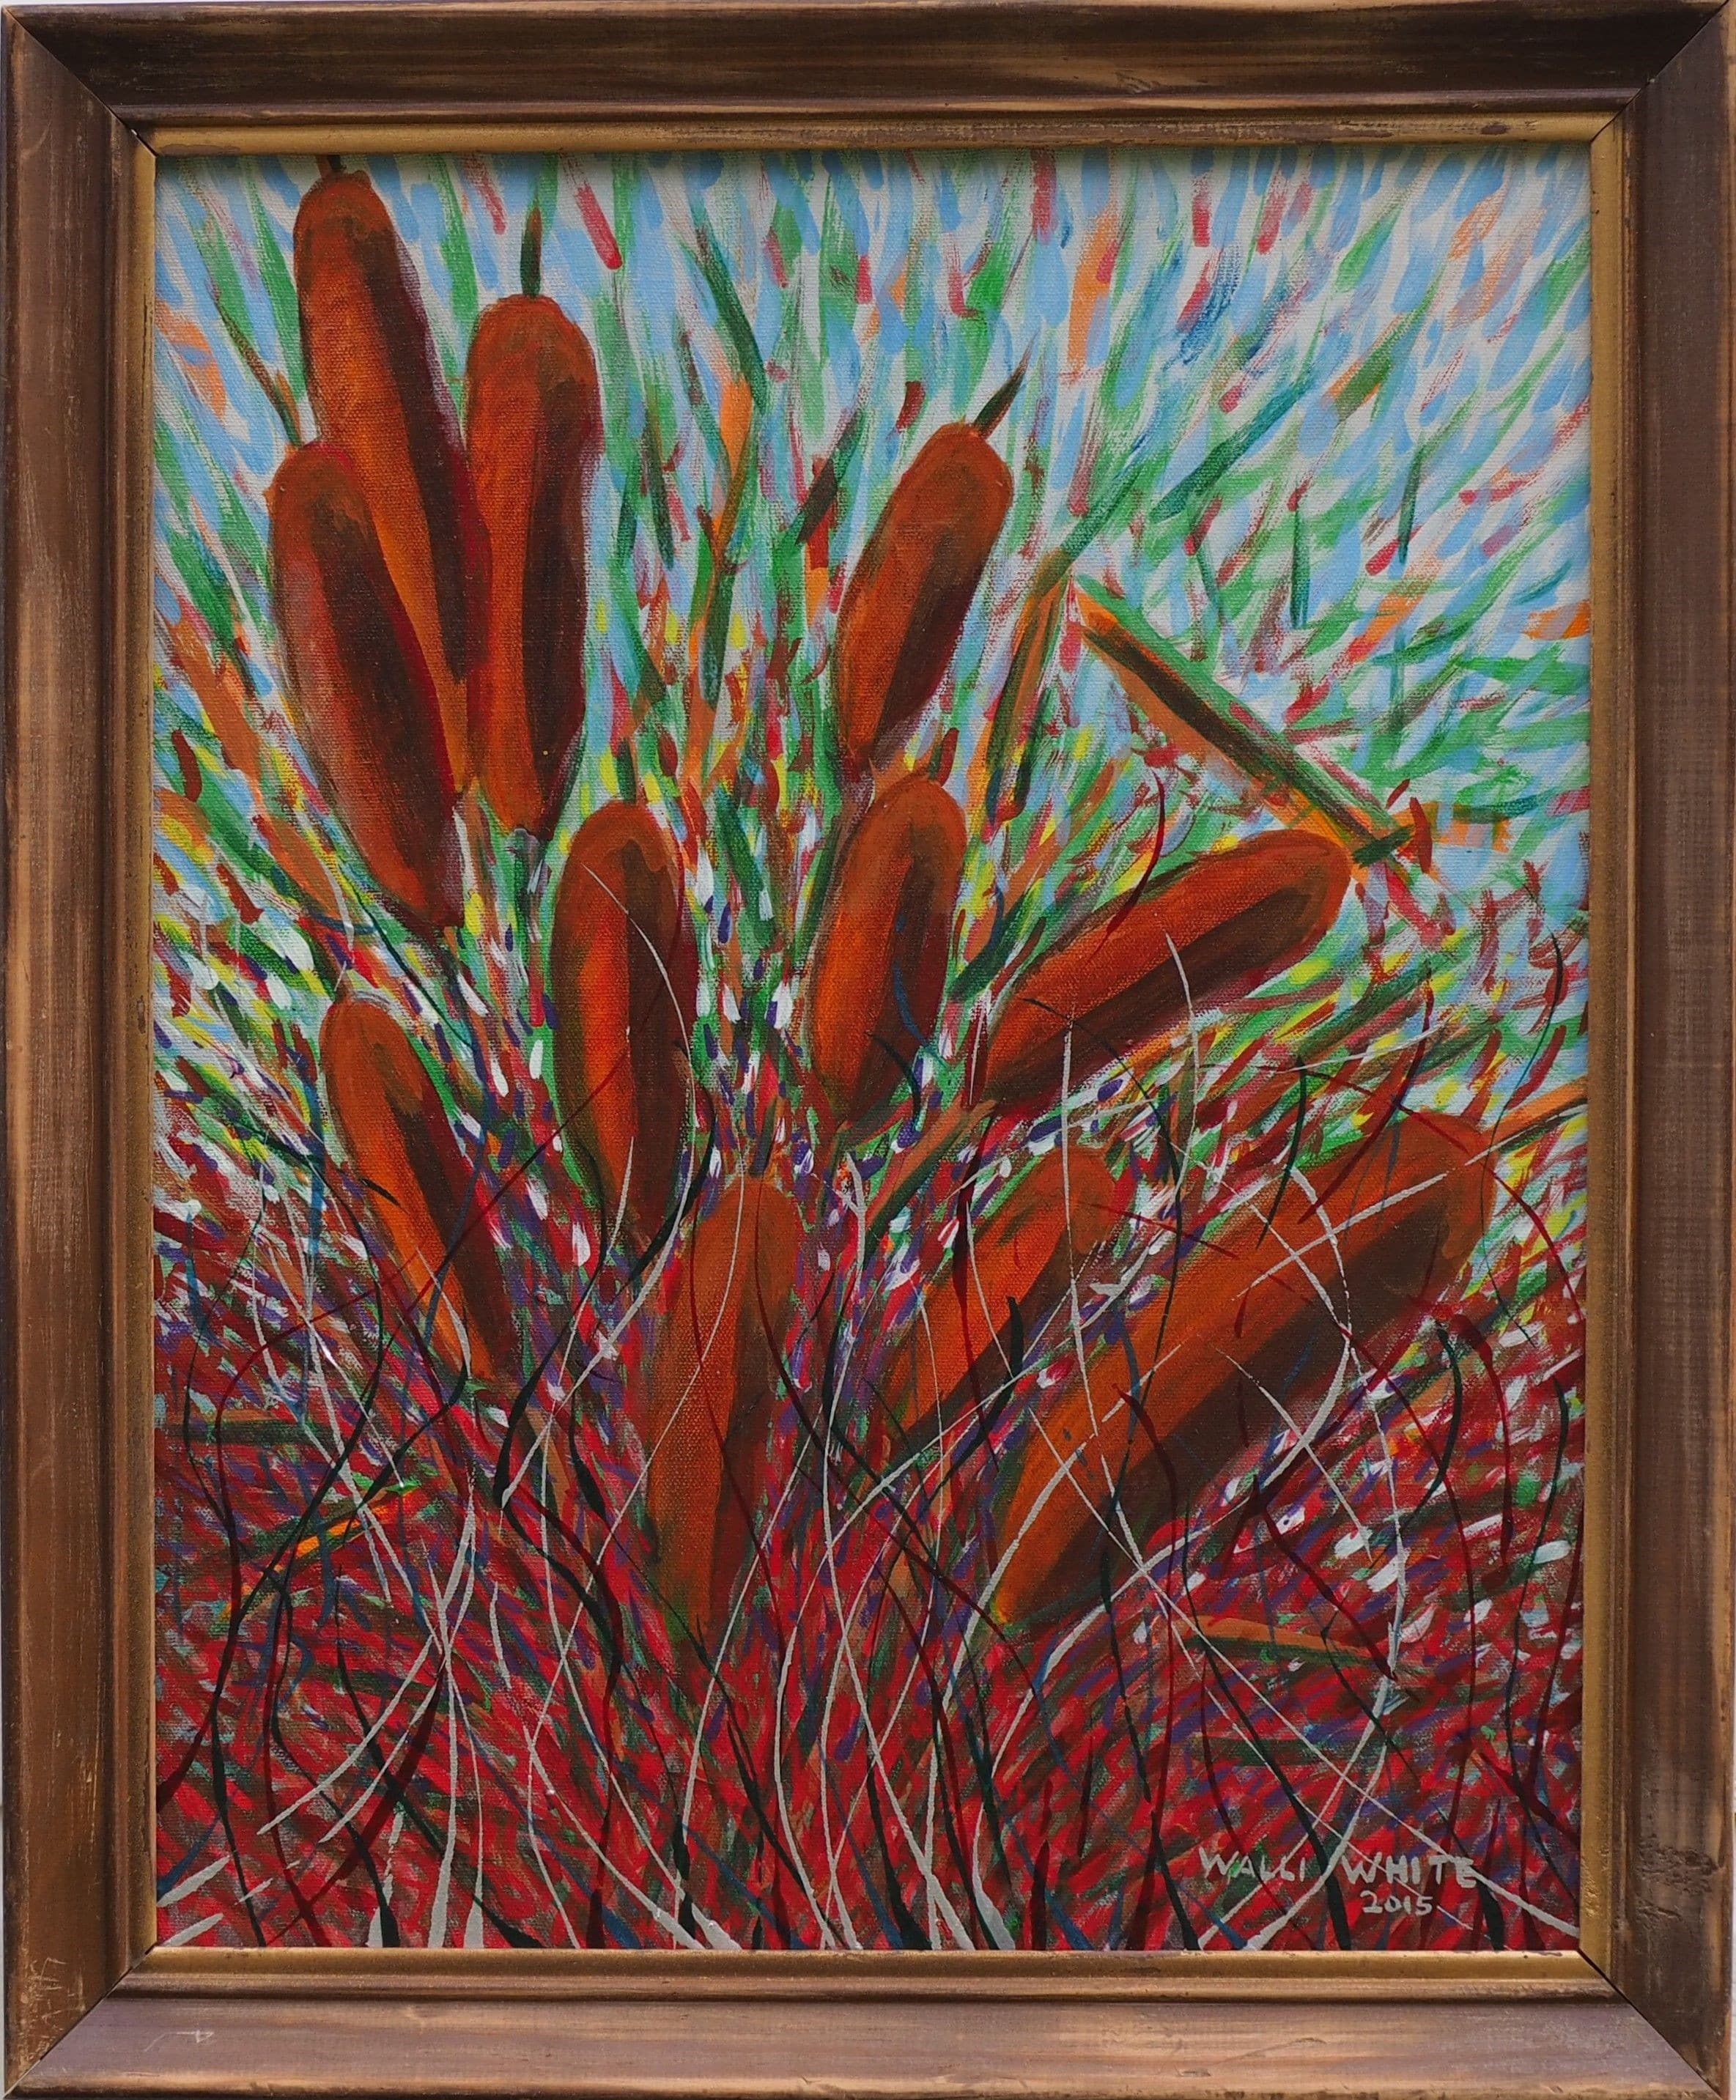 Cattails, 2015
Acrylic and Metallic Paint on Stretched Canvas
16"W x 20"H, Walli White, artist